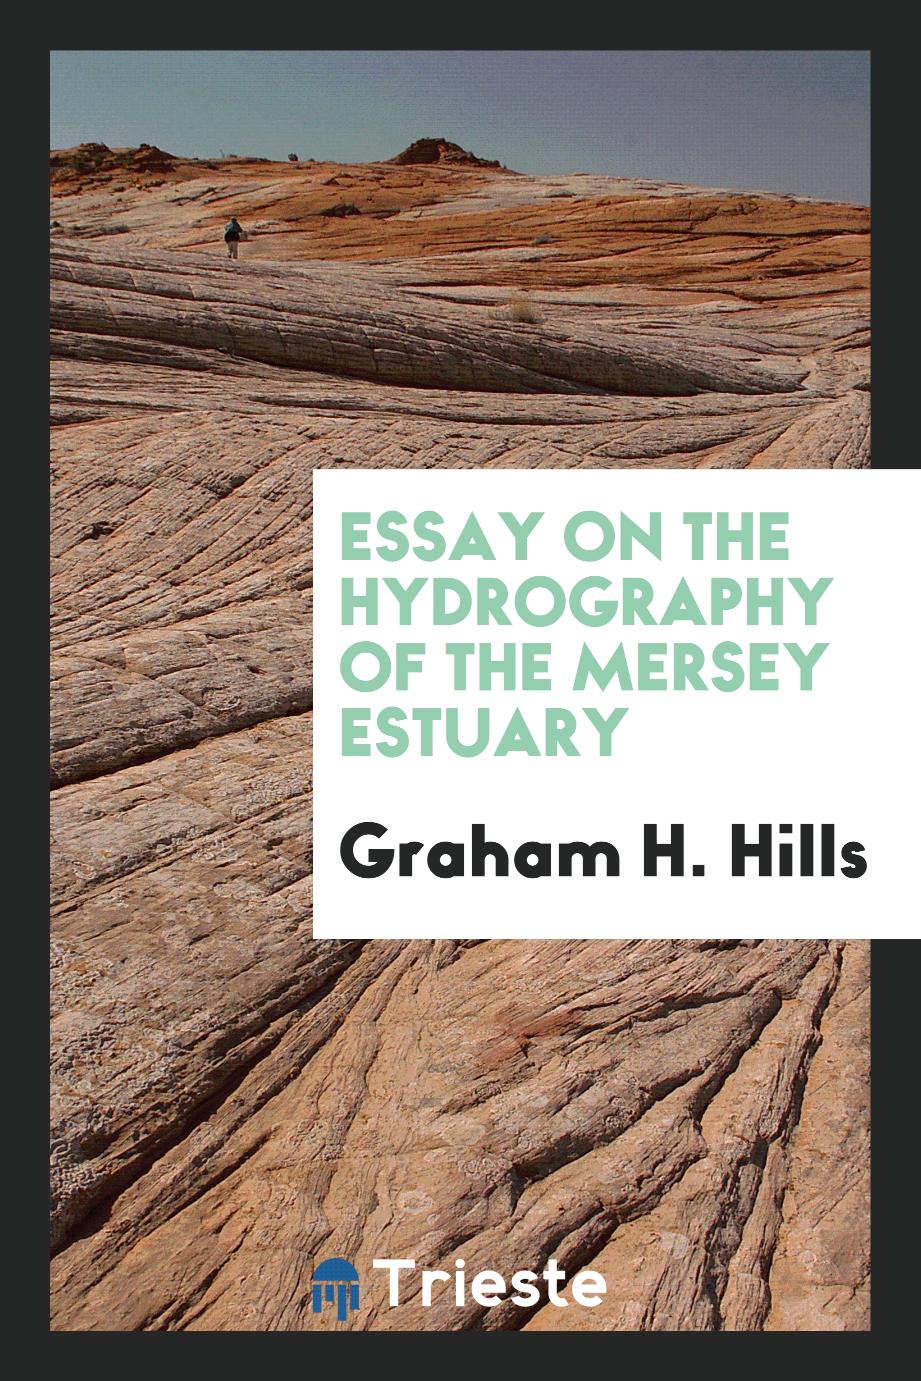 Essay on the hydrography of the Mersey estuary